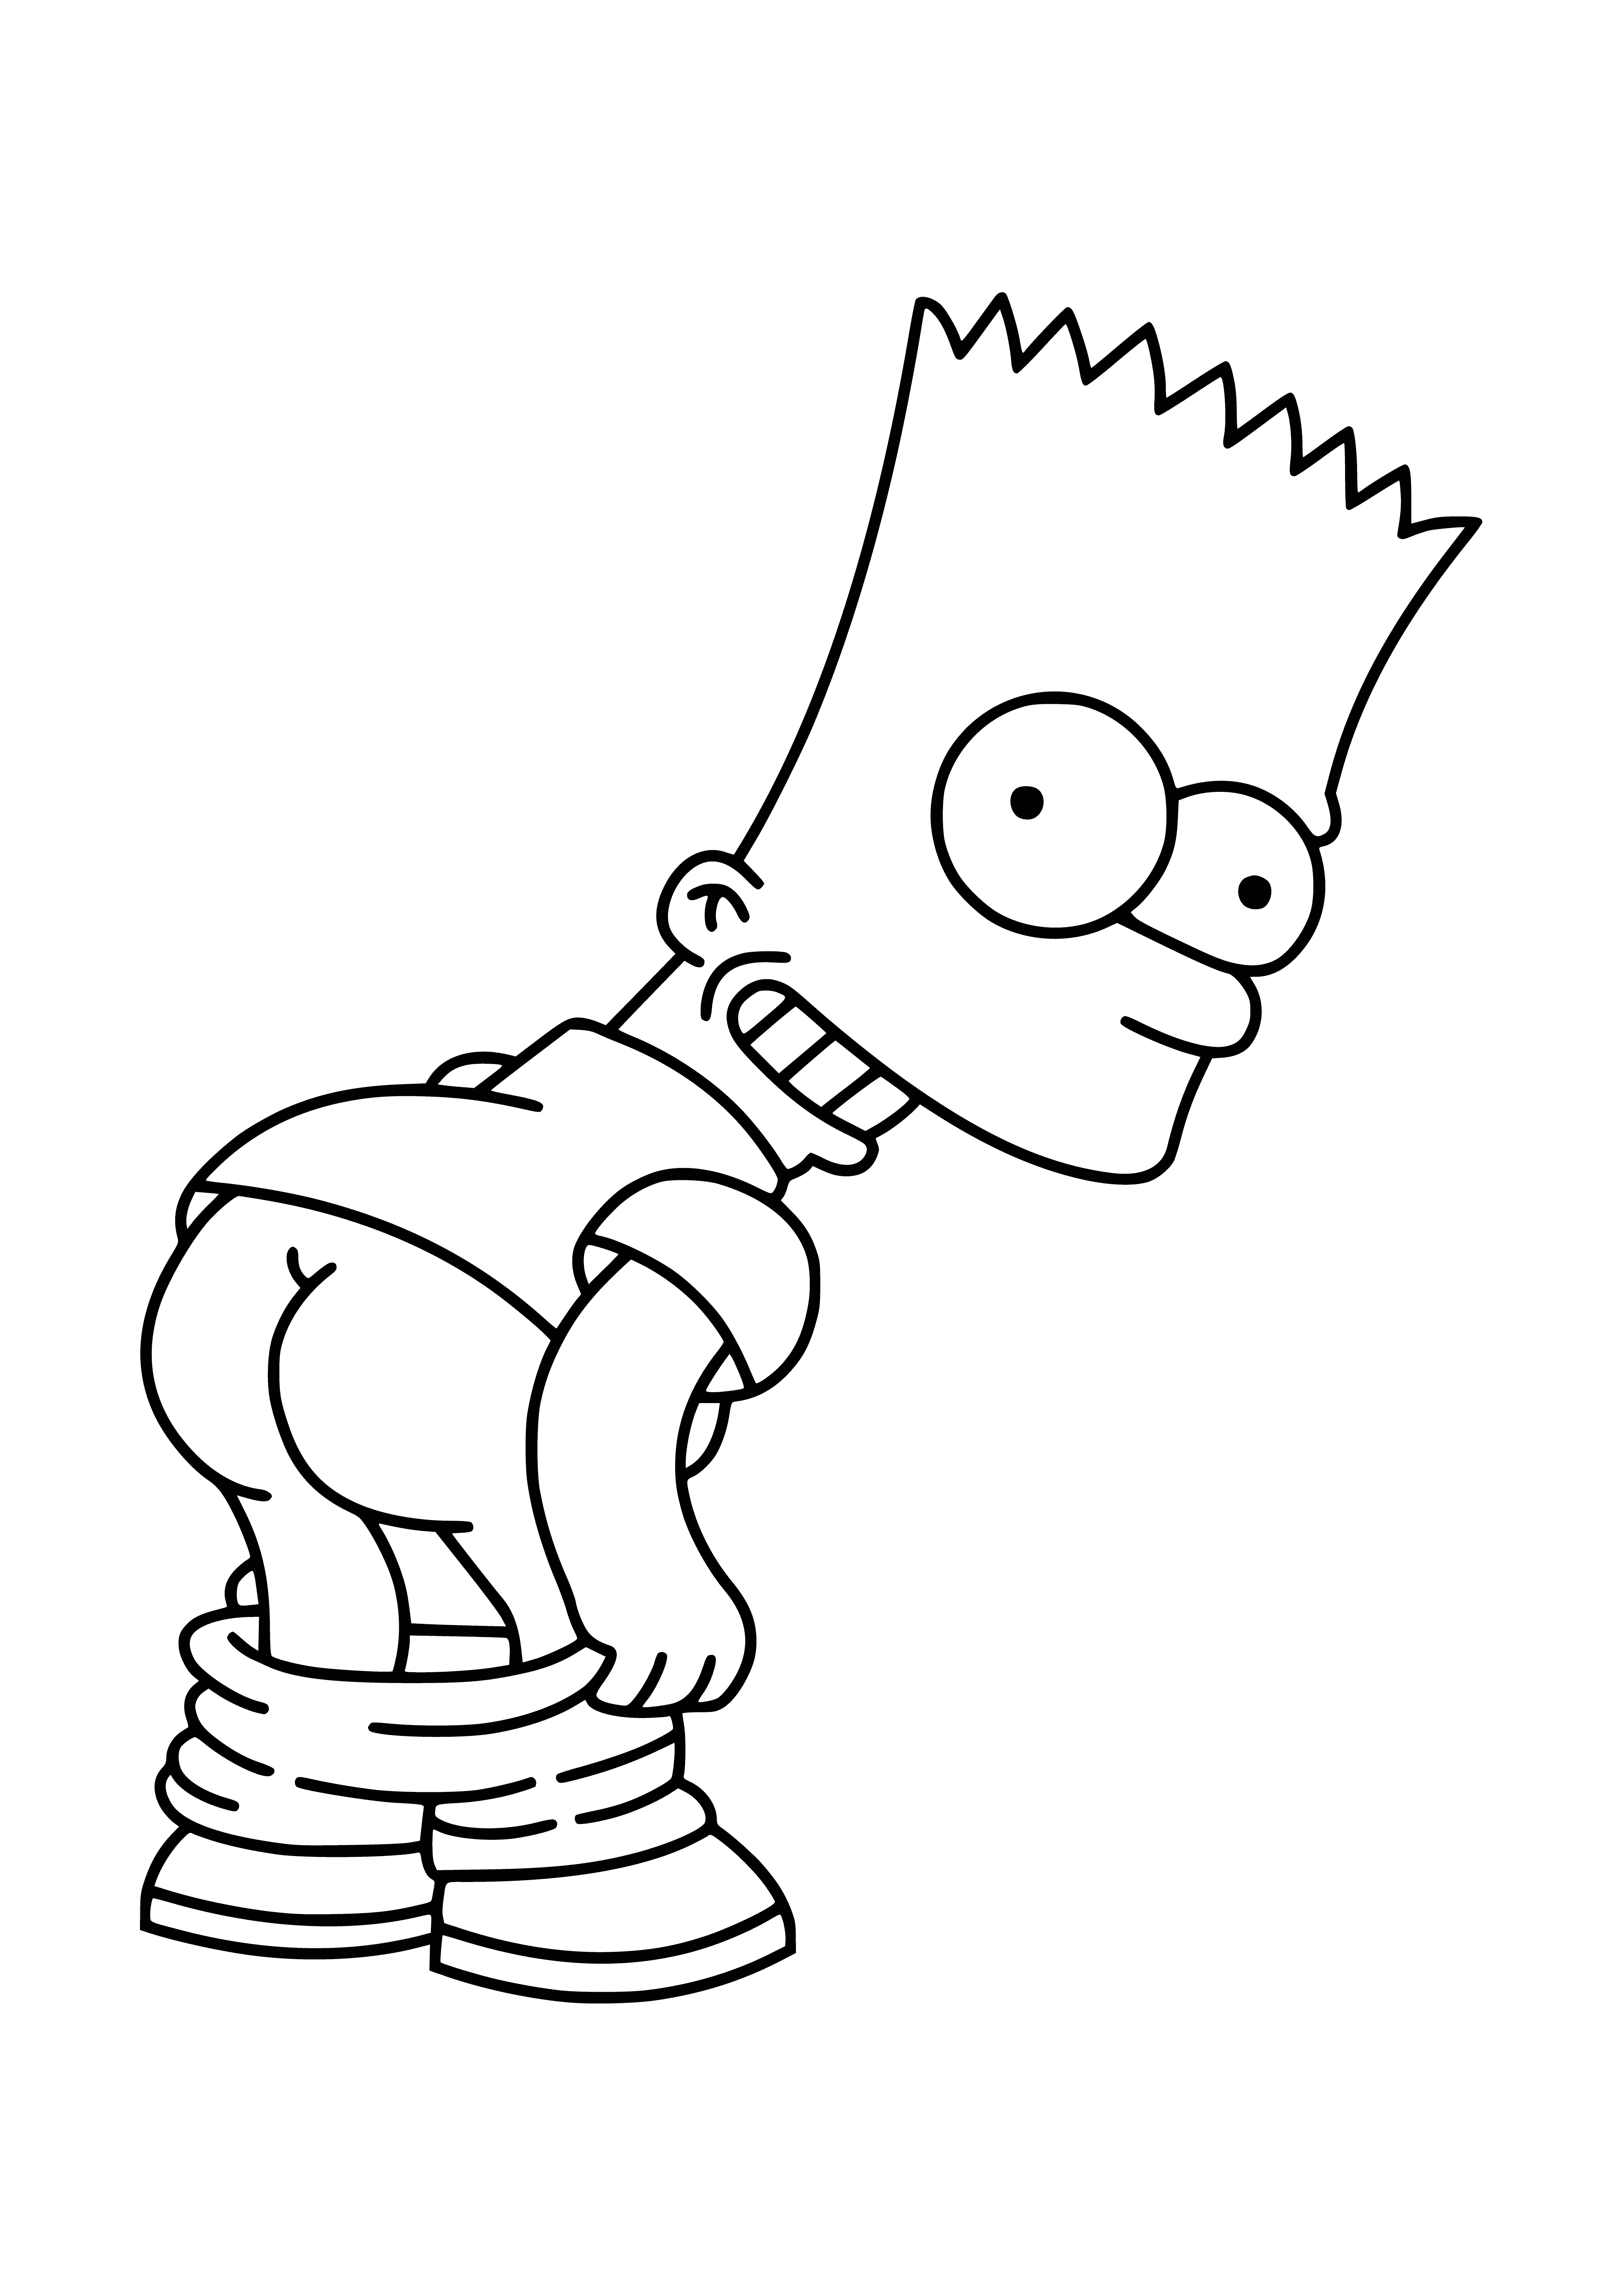 coloring page: Troublemaker Bart: Standing on a chair, holding spray paint & can, bright green shirt, messy spiked hair. Ready to cause chaos?  #troublemakerBart